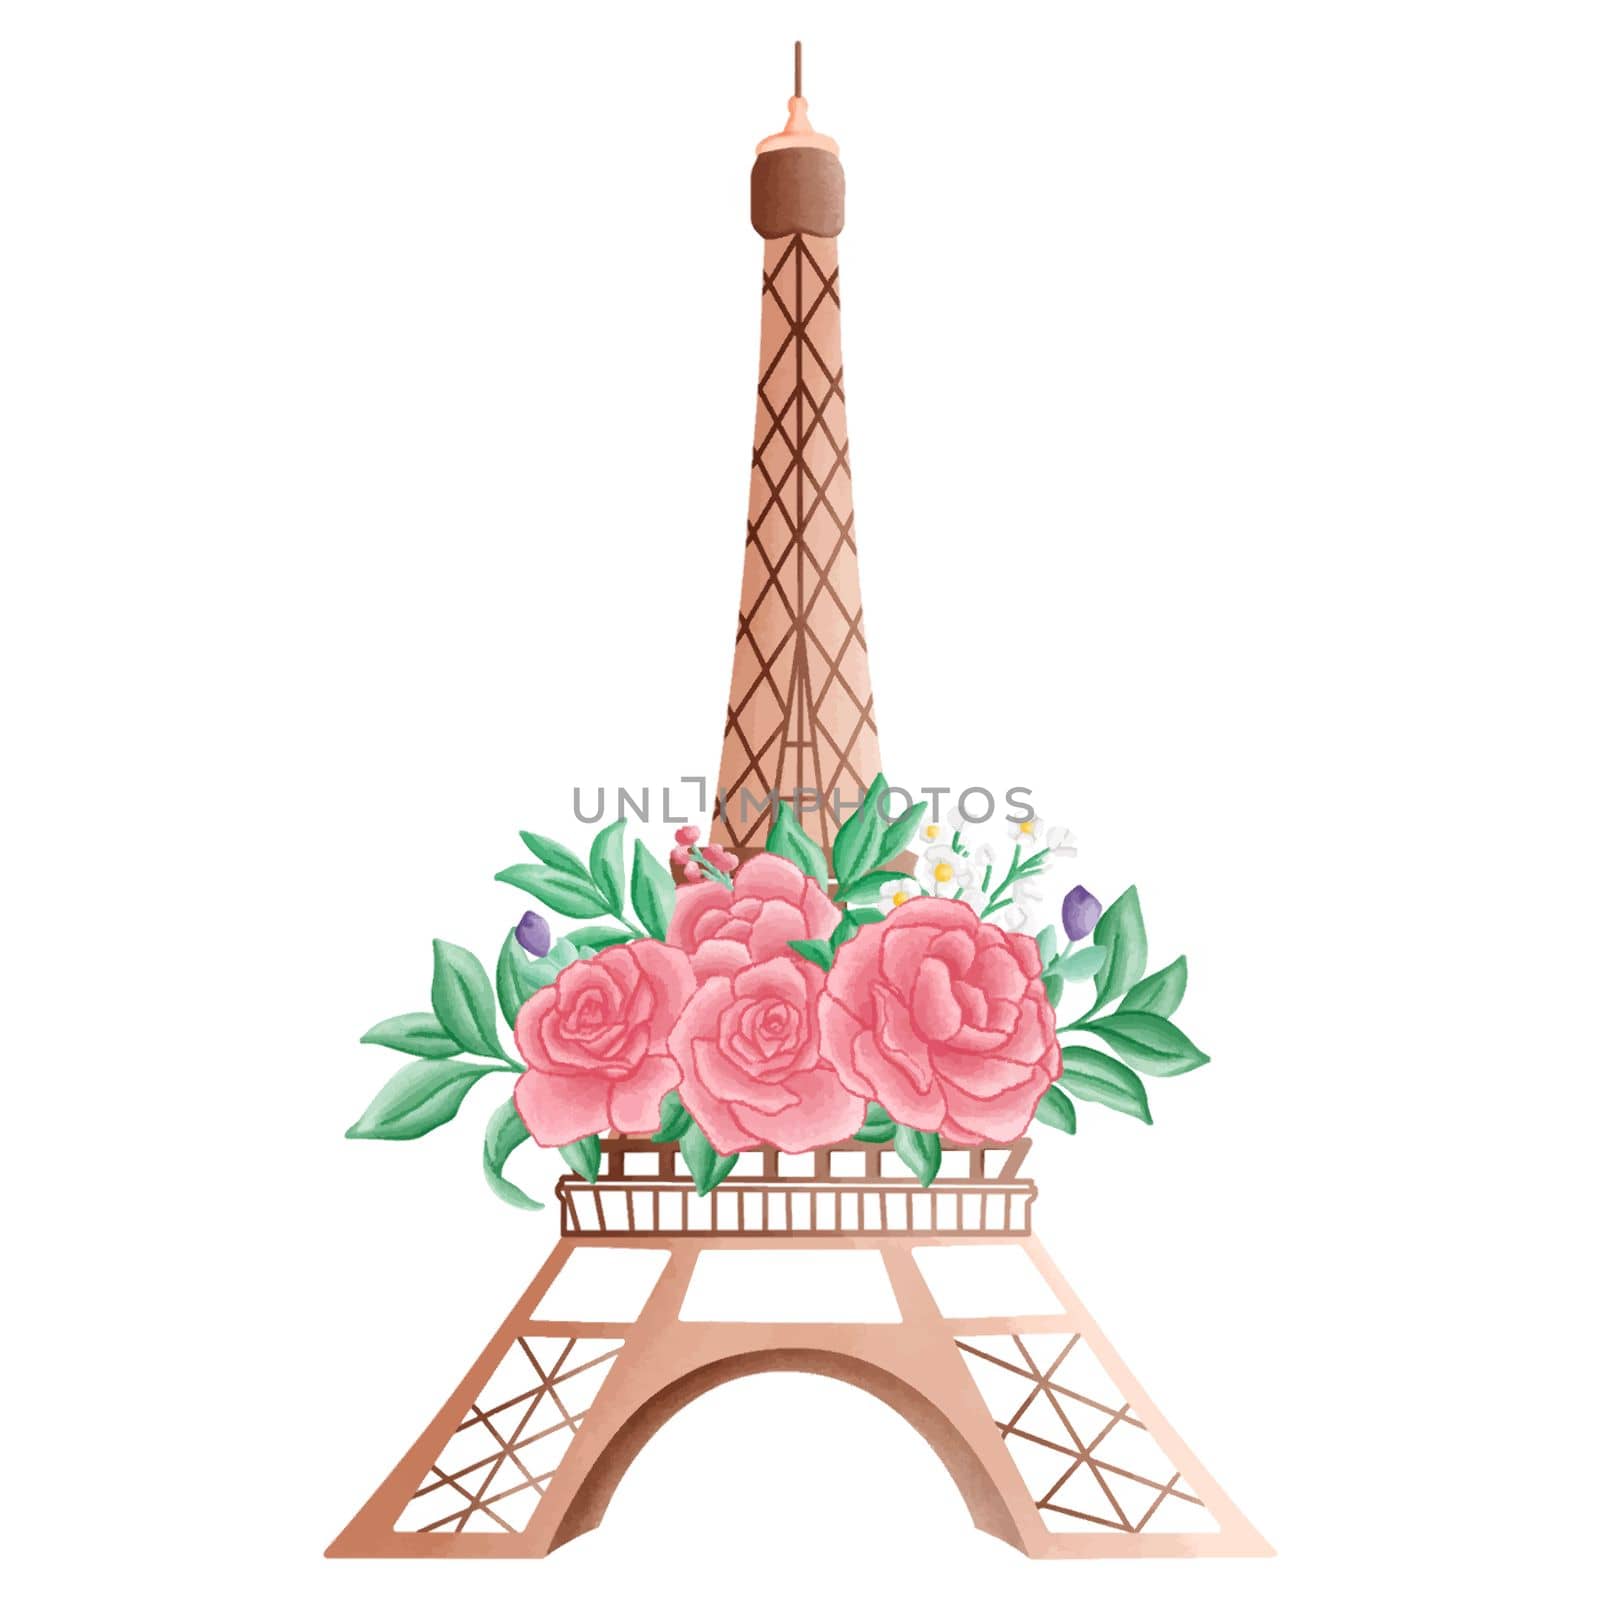 Romantic Eifffel Tower Watercolor Clipart PNG. Paris In Love with pink pastel Eiffel Tower with roses flowers for romantic design element, love art, wedding watercolor illustration. by Skyecreativestudio